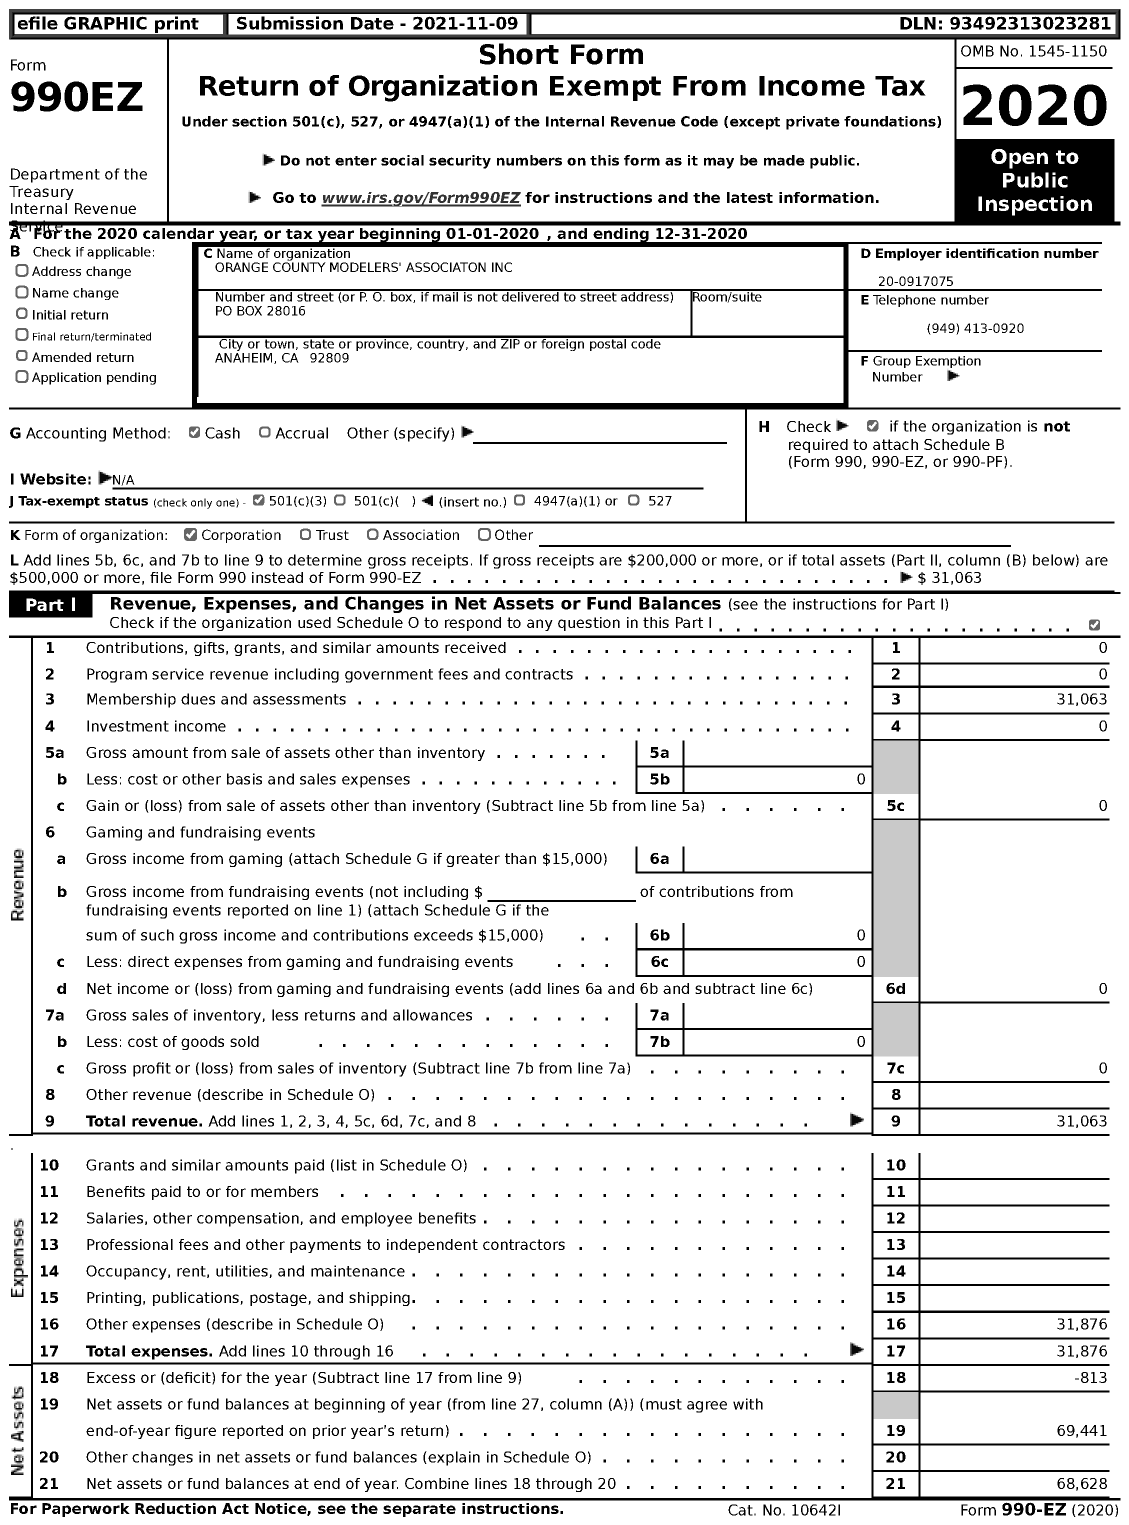 Image of first page of 2020 Form 990EZ for Orange County Modelers' Associaton